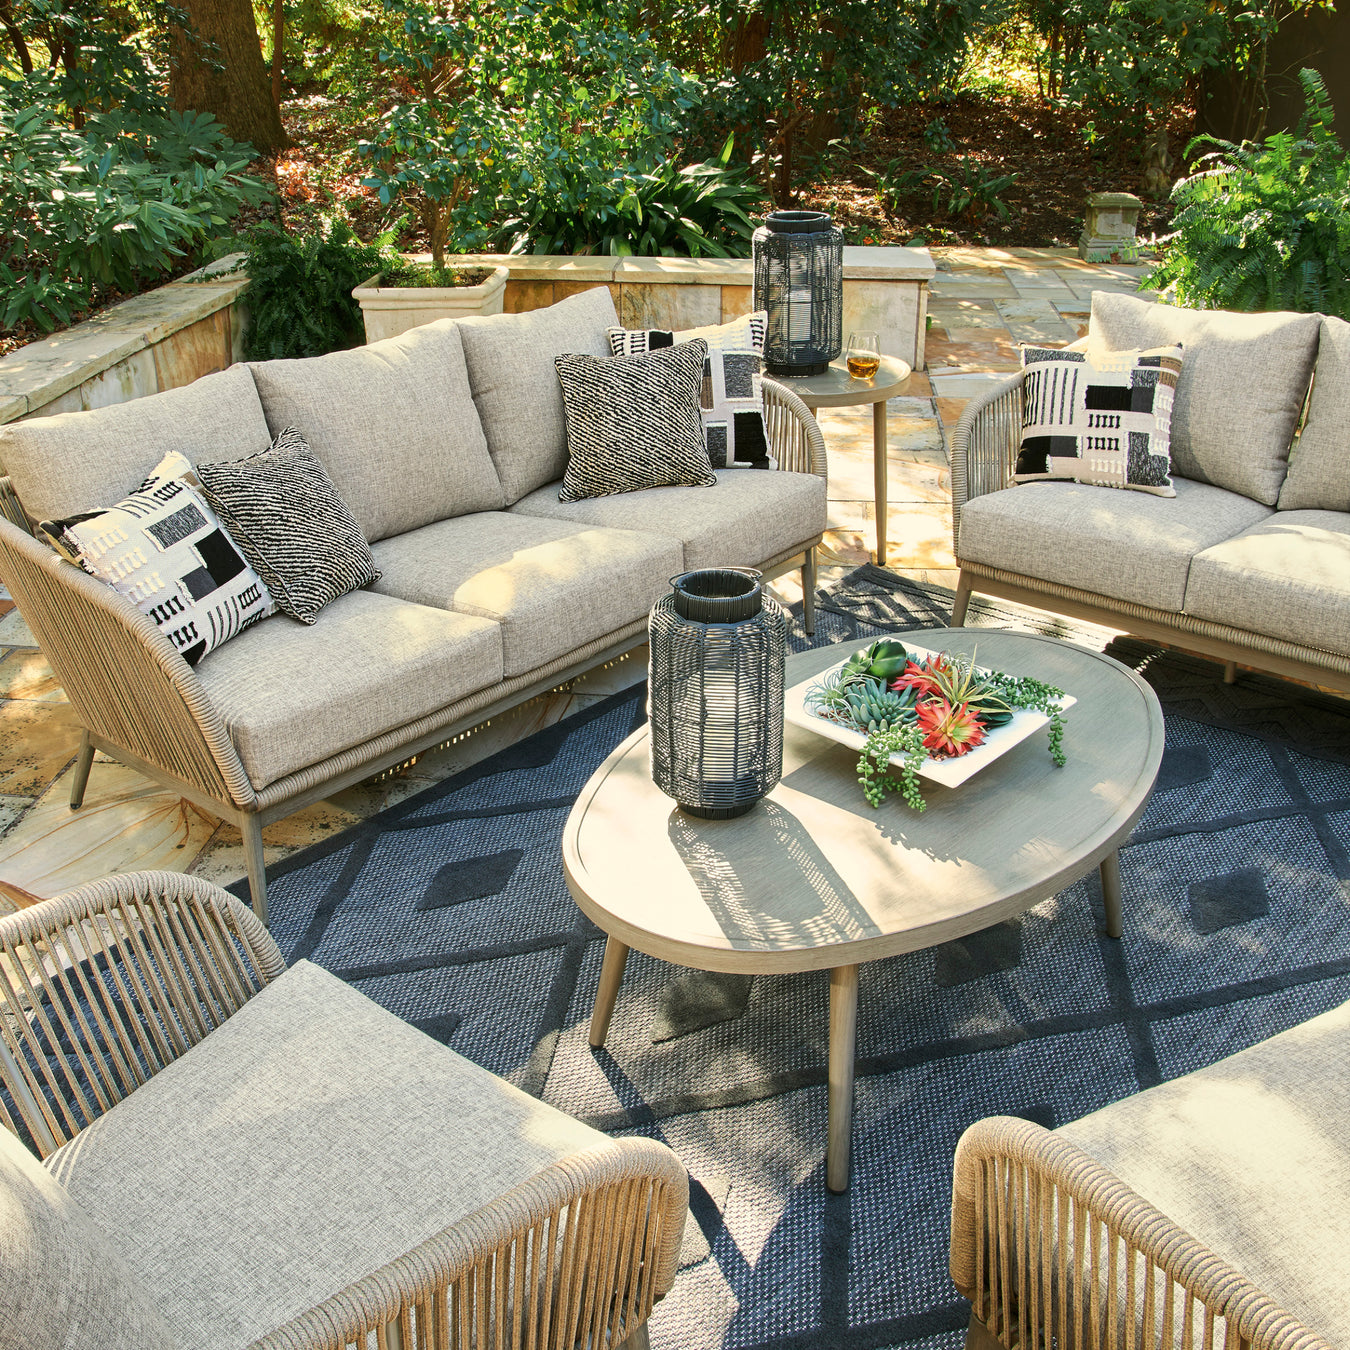 Shop Outdoor Furniture at JR Furniture Store in Fayetteville, NC 28311